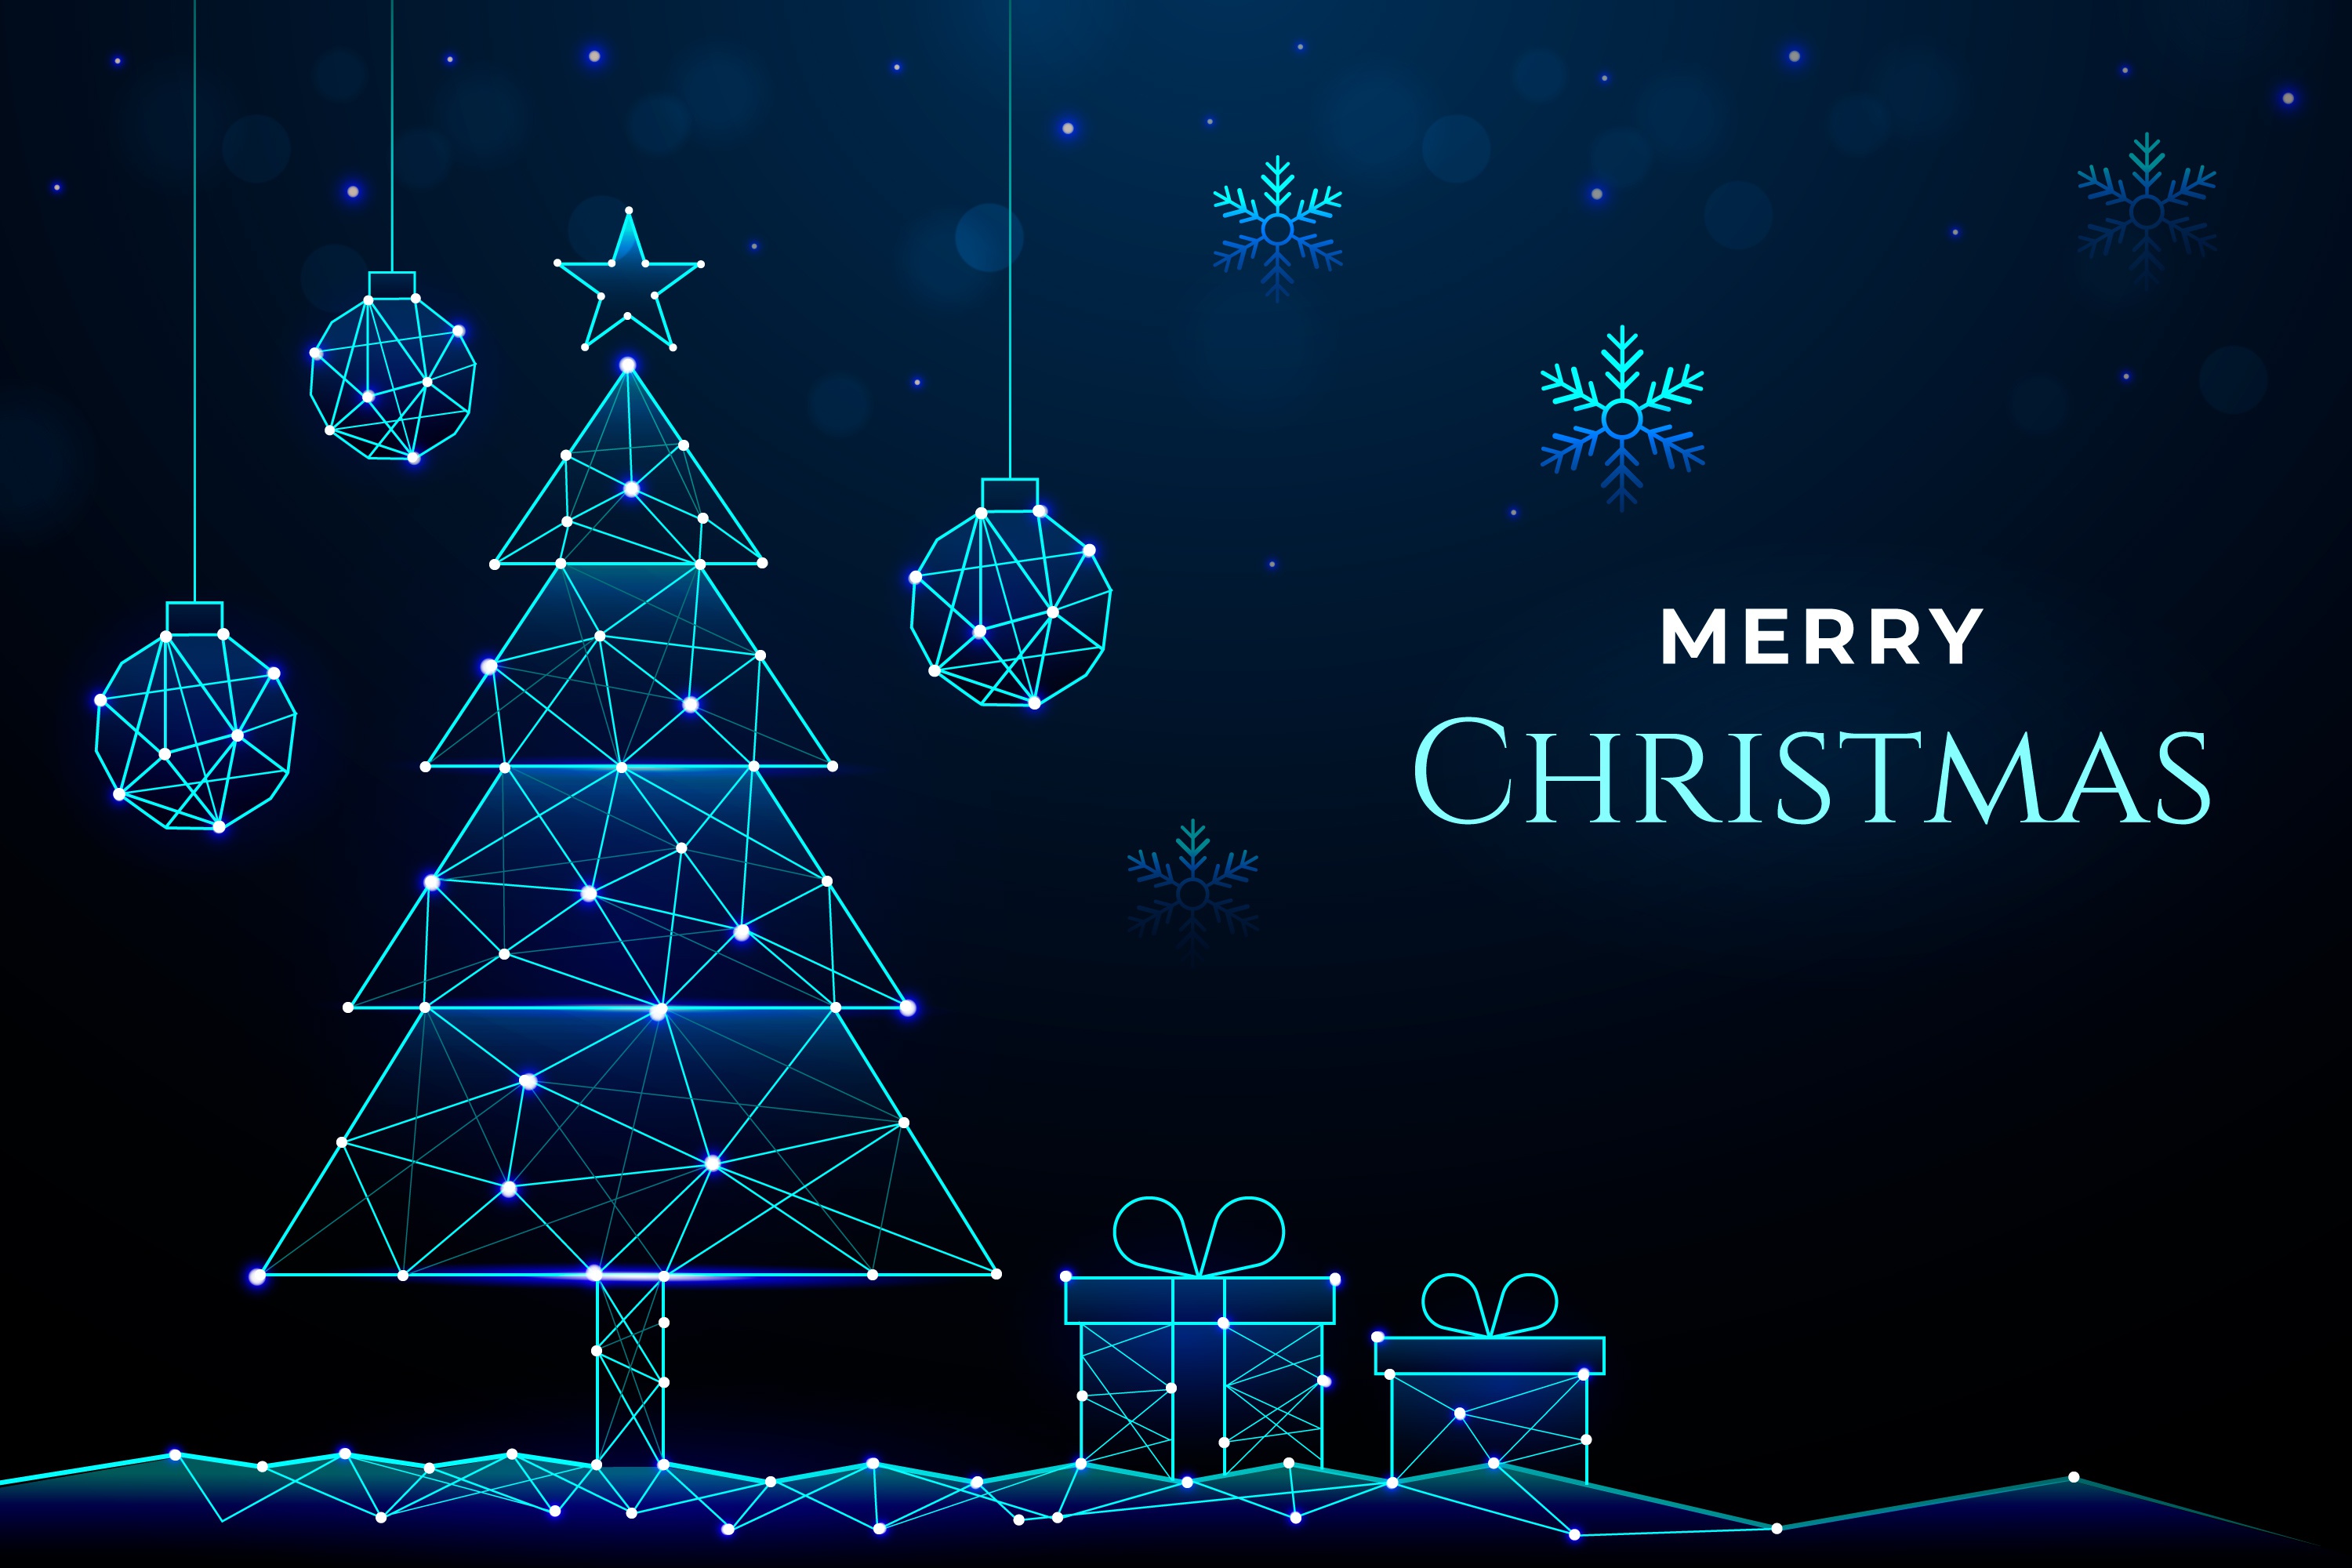 650+ Merry Christmas HD Wallpapers and Backgrounds